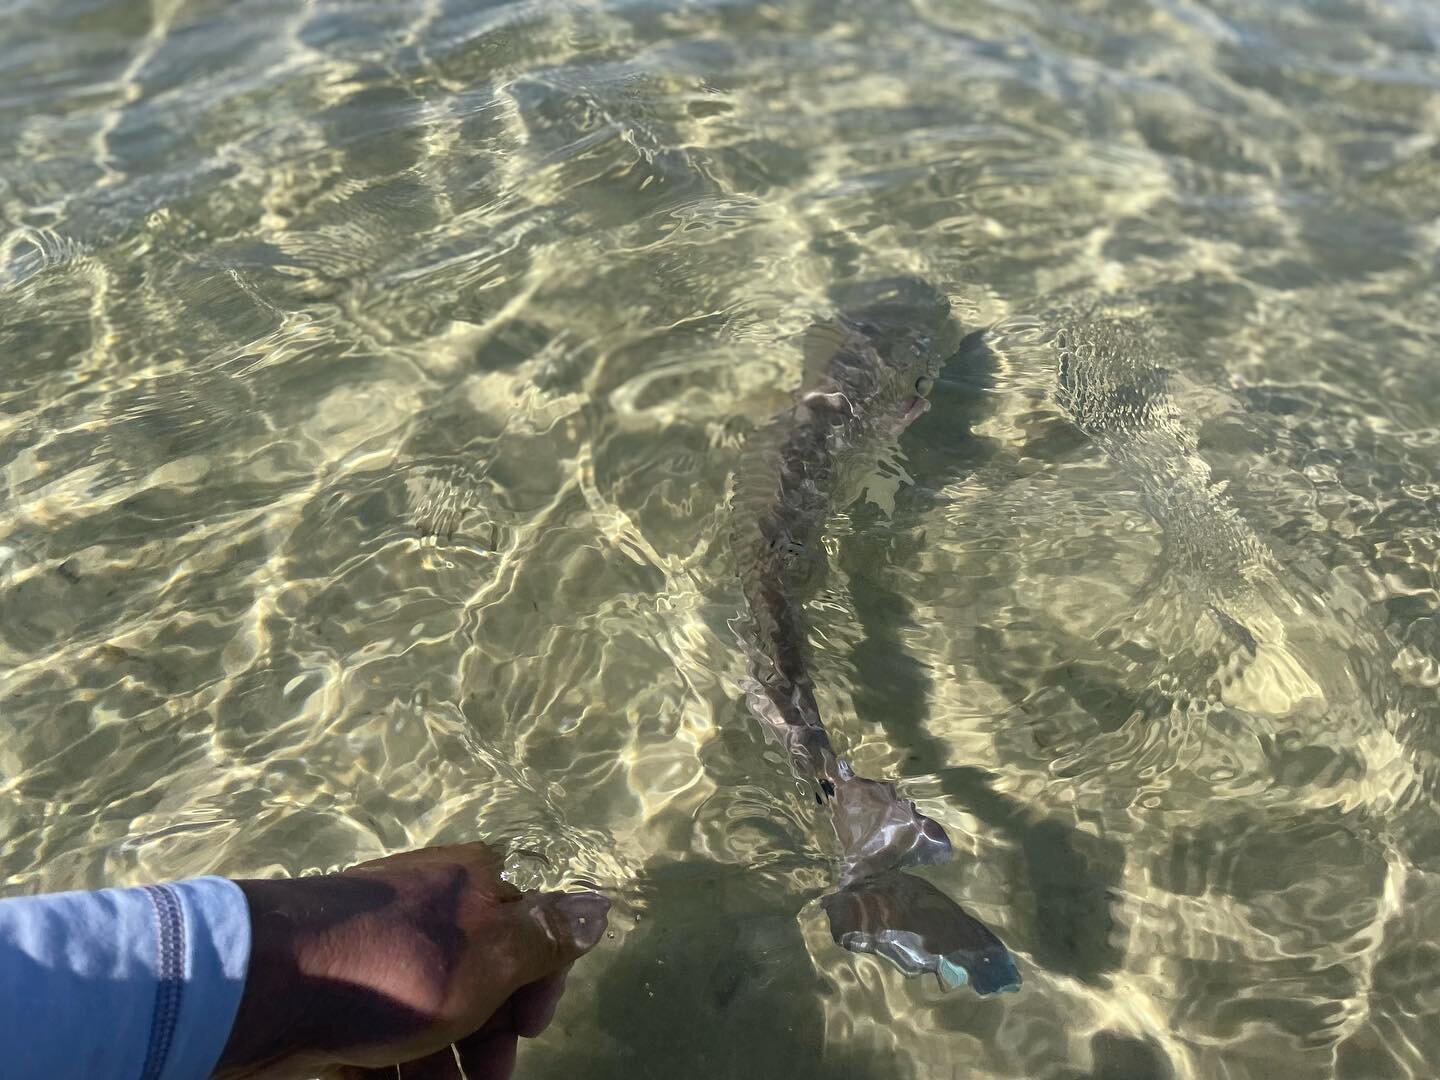 Ankle deep tailers kinda do it for me.  #flyfishing#flyfishingsaltwater#saltwaterflyfishing #saltwaterfishing #pensacolafishing #pensacolabeach #perdidokey #fishingpensacola #flyfishingpensacola #fishingpensacolabeach #flyfishingpensacolabeach #flyfi